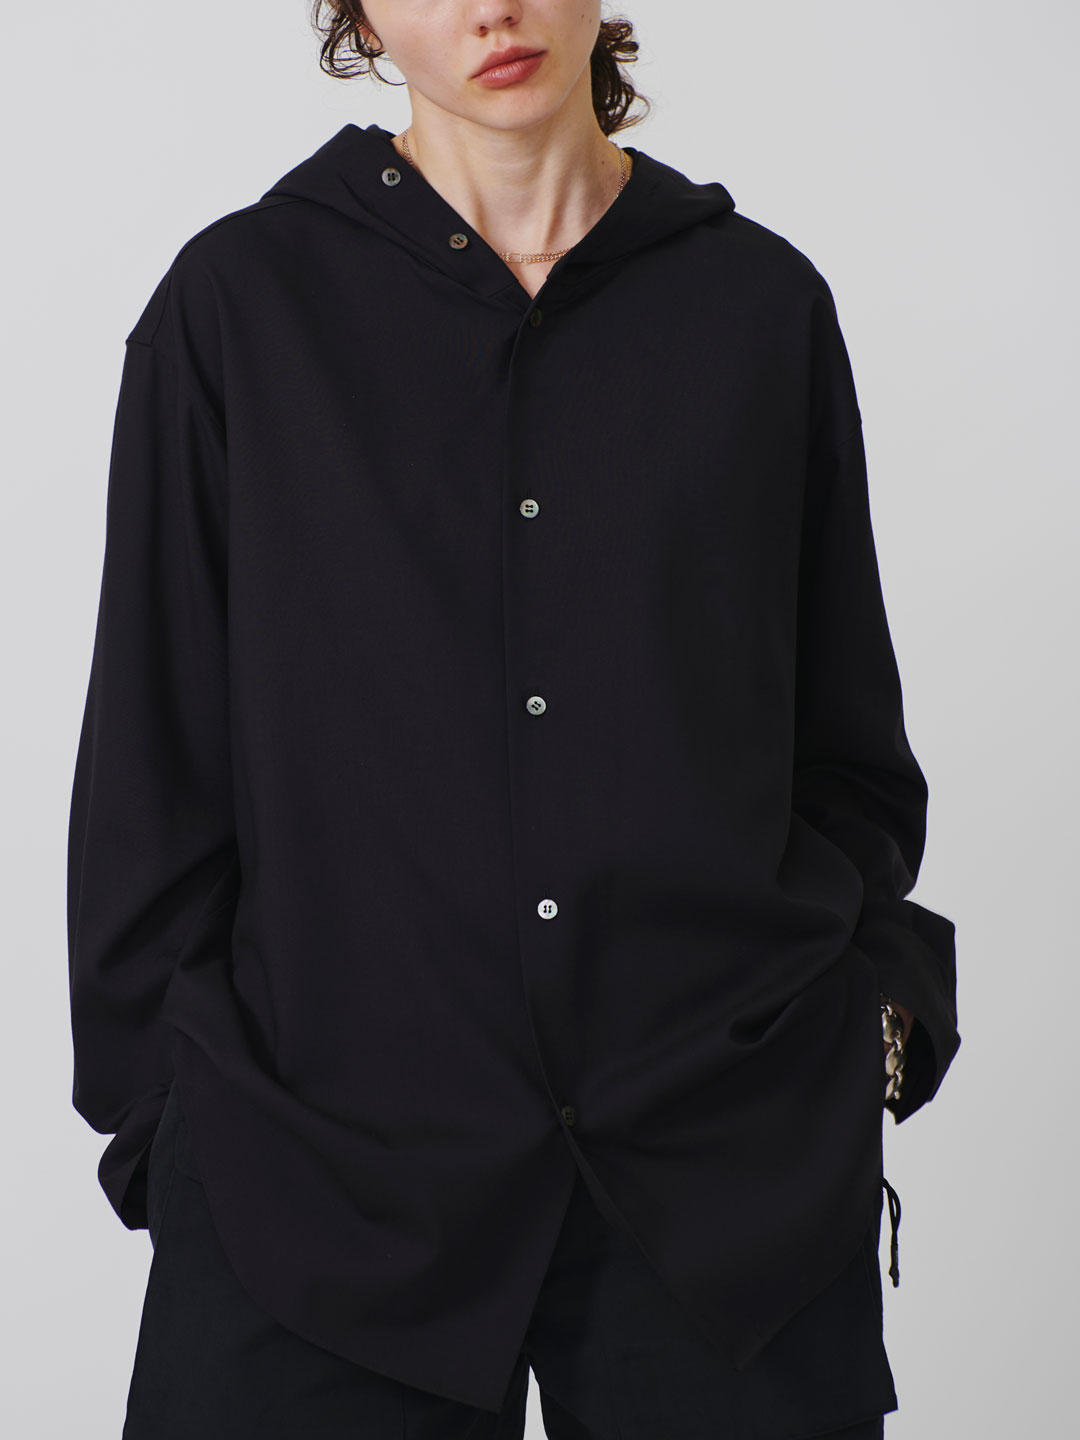 Dropped Shoulder Hoody Top - Charcoal